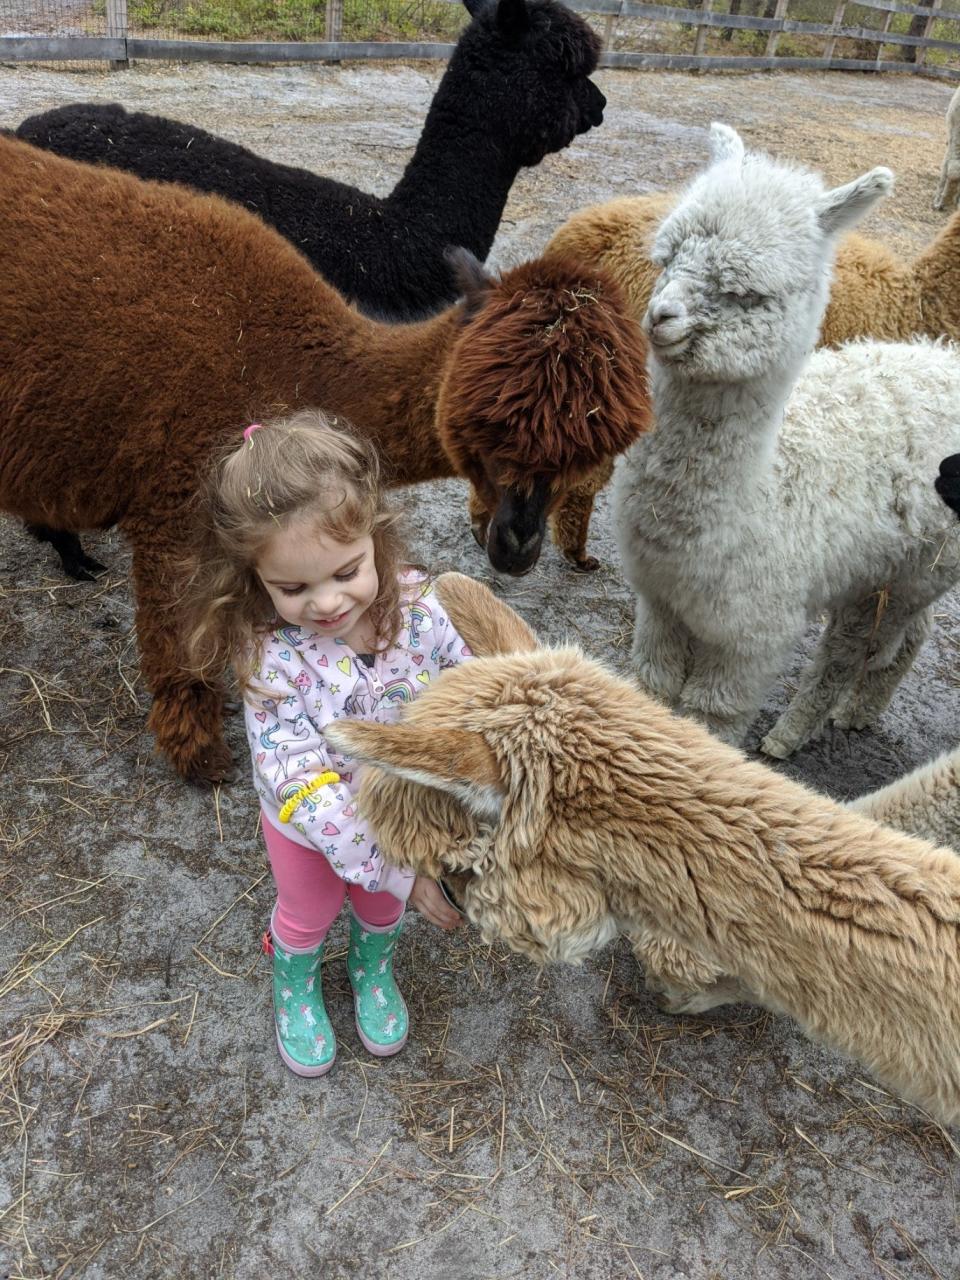 Kim and Herman Weigman own Out of Sight Alpacas in Waretown, where they breed award-winning alpacas.